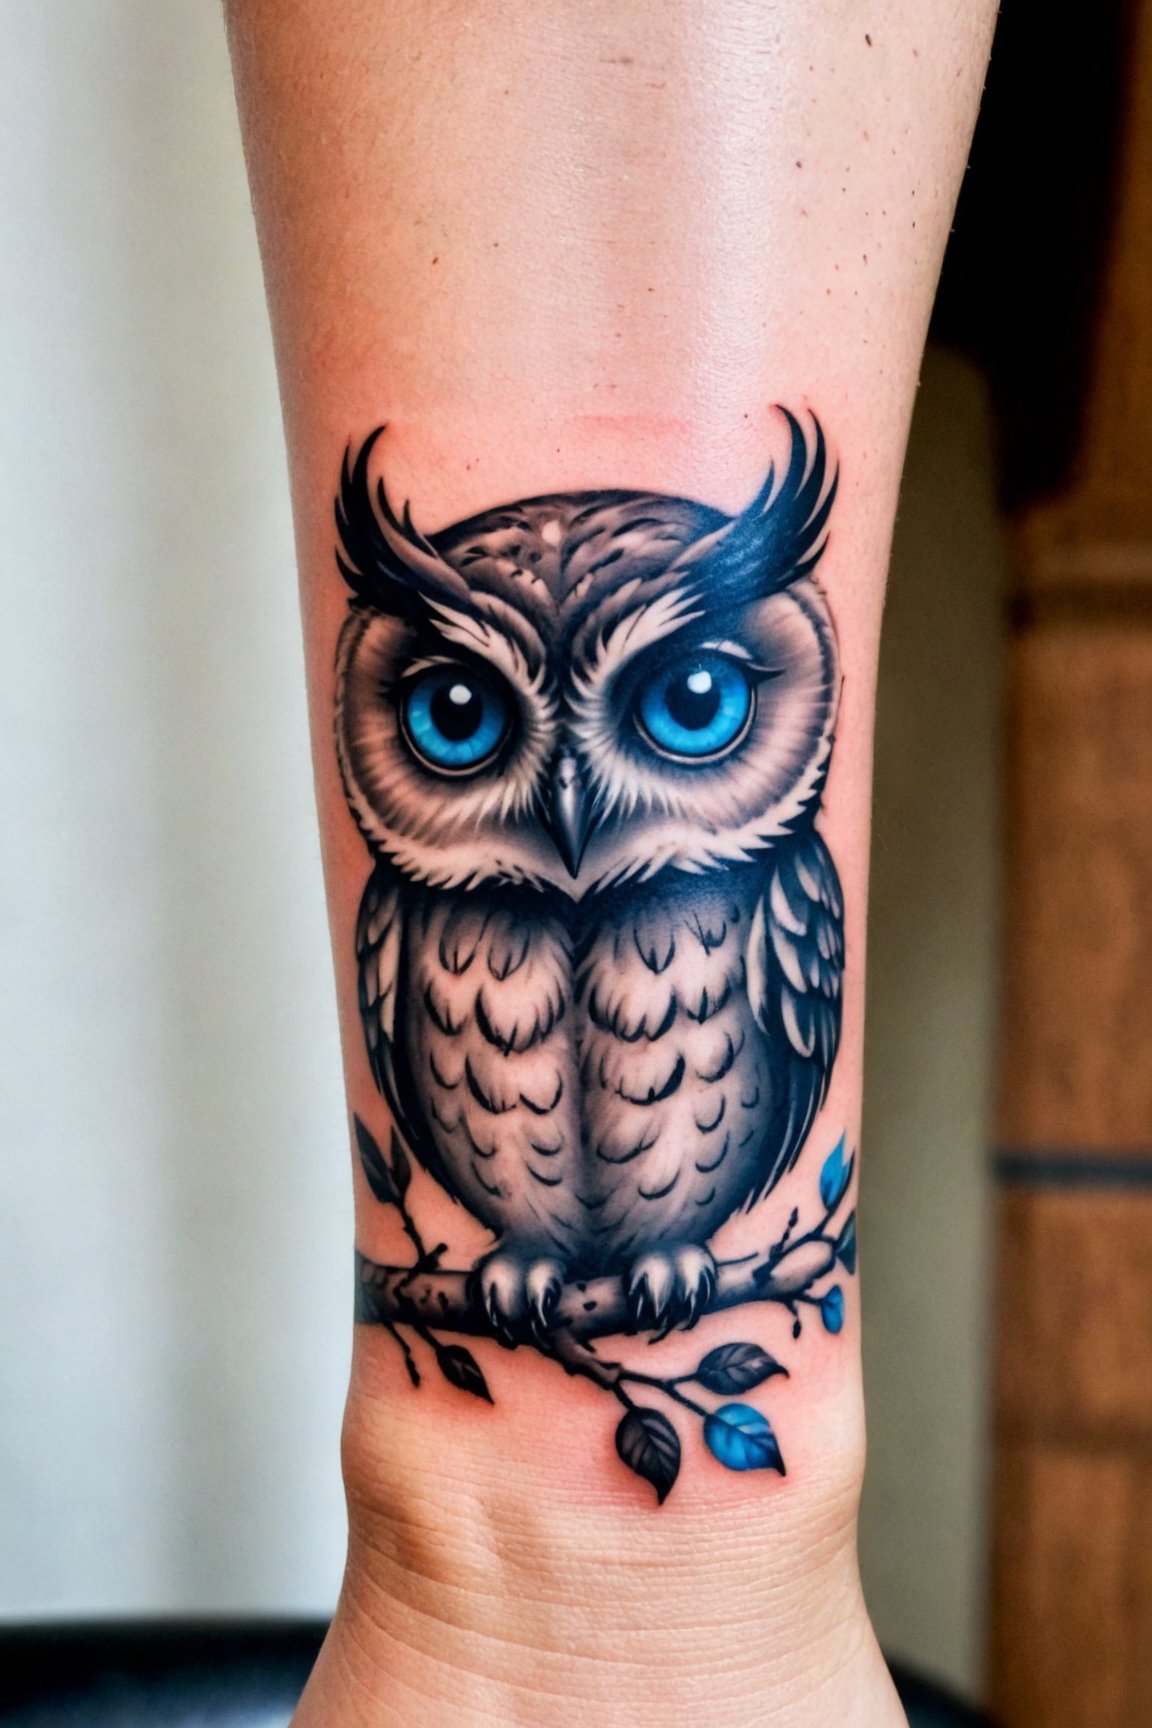 Wrist Tattoo, Tattoo Design, a tattoo of an owl sitting on a branch with blue eyes and a black and white design on the wrist